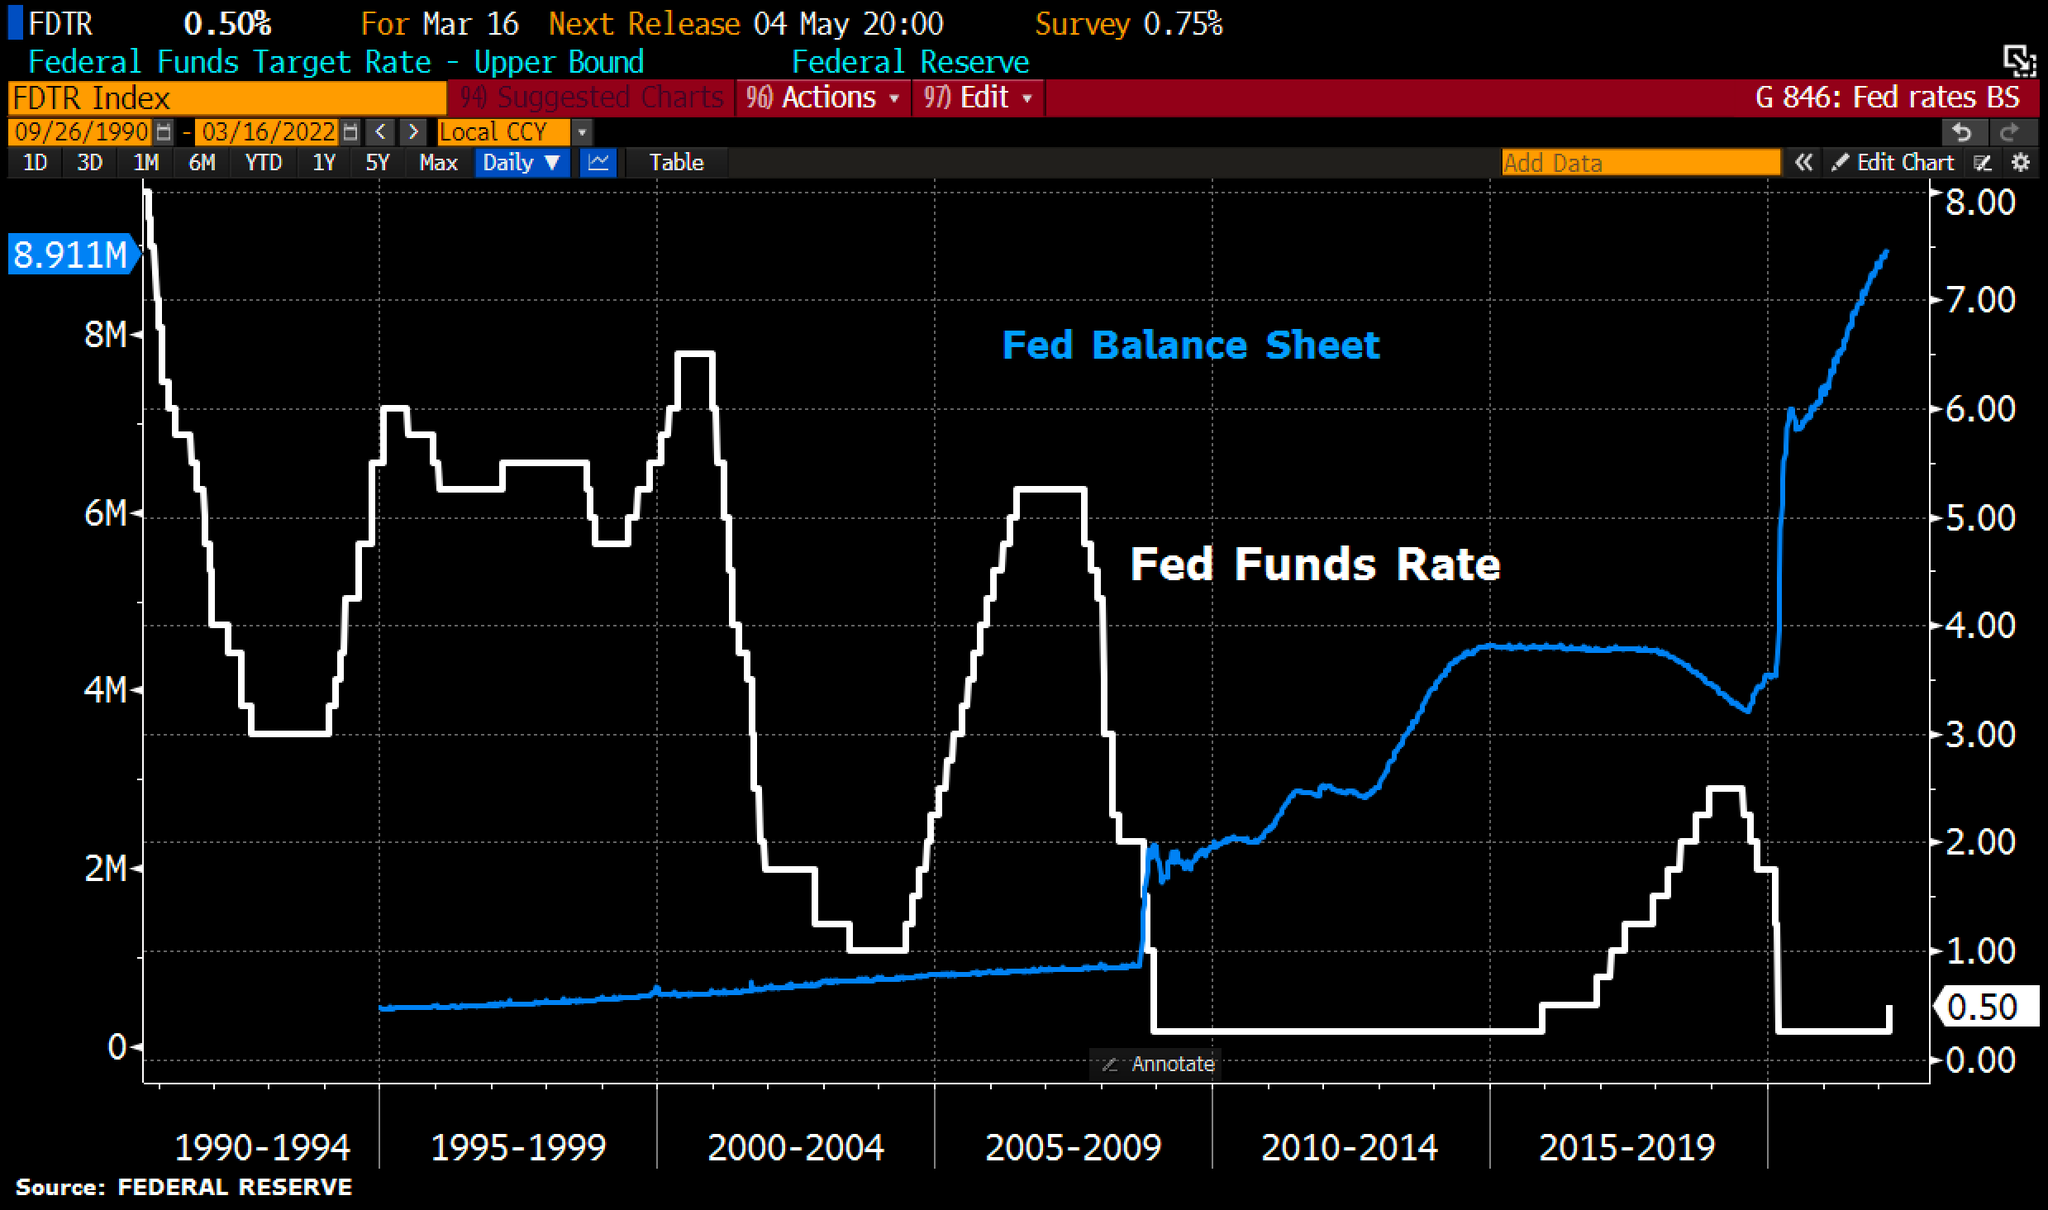 Holger Zschaepitz on X: "#Fed raises interest rates for 1st time in 3yrs to fight inflation by 25bps to 0.25-0.50% as expected, forecasts 6 more hikes in 2022. Median dot-plot forecast for